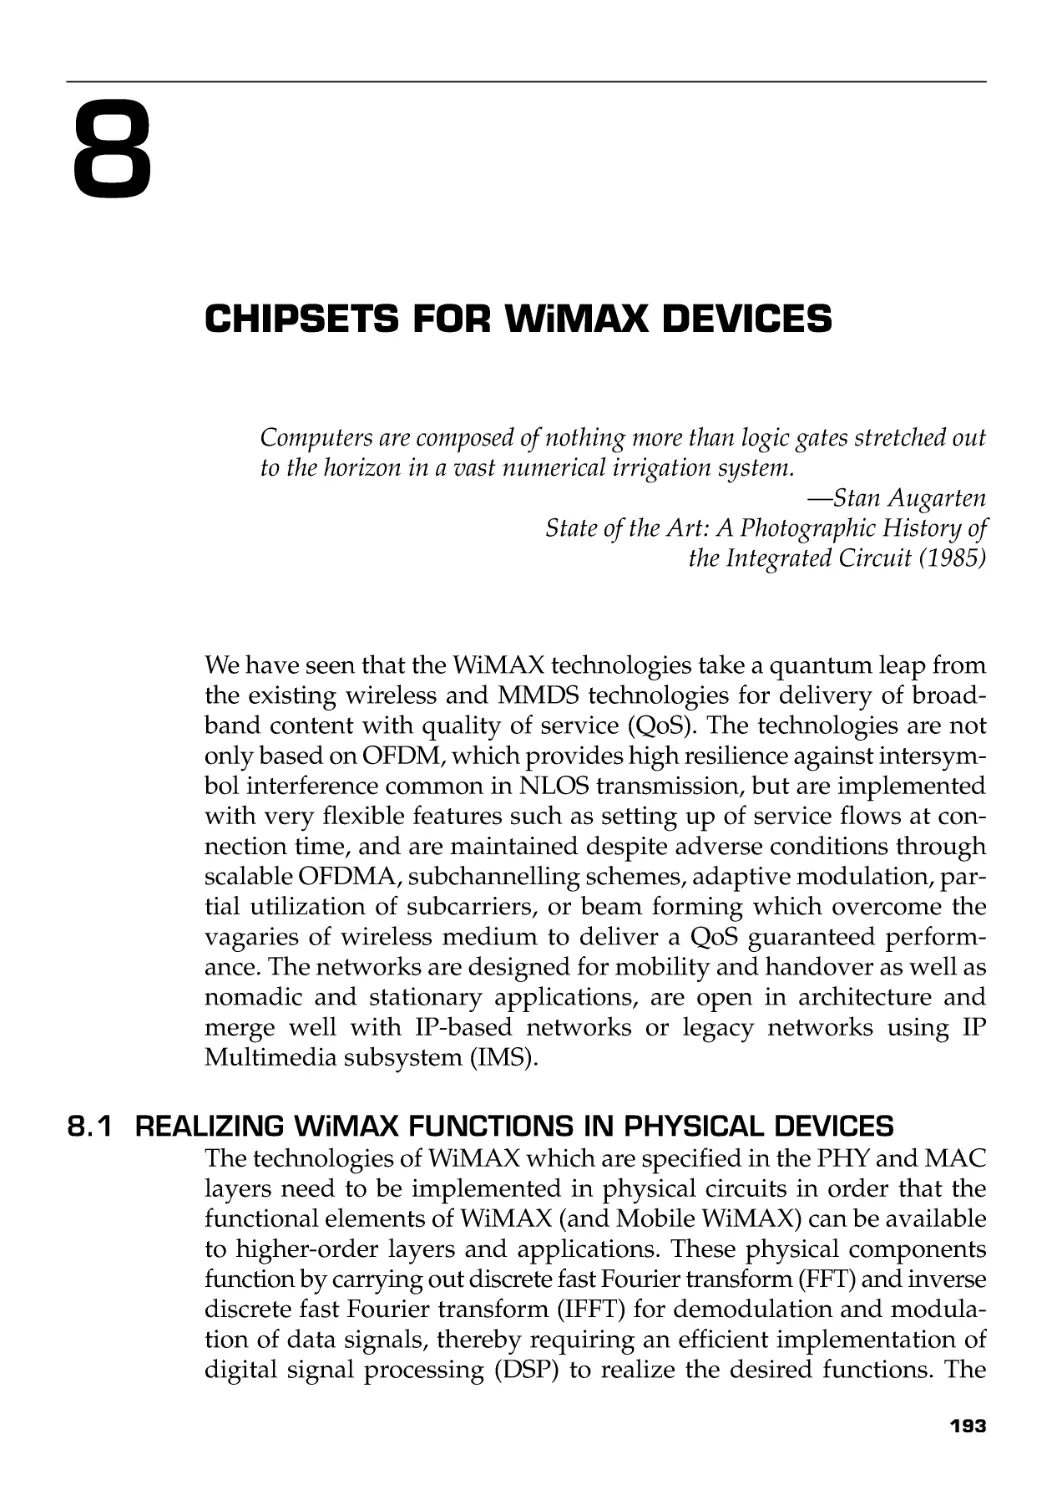 Chapter 8 Chipsets for WiMAX devices
8.1 Realizing WiMAX Functions in Physical Devices